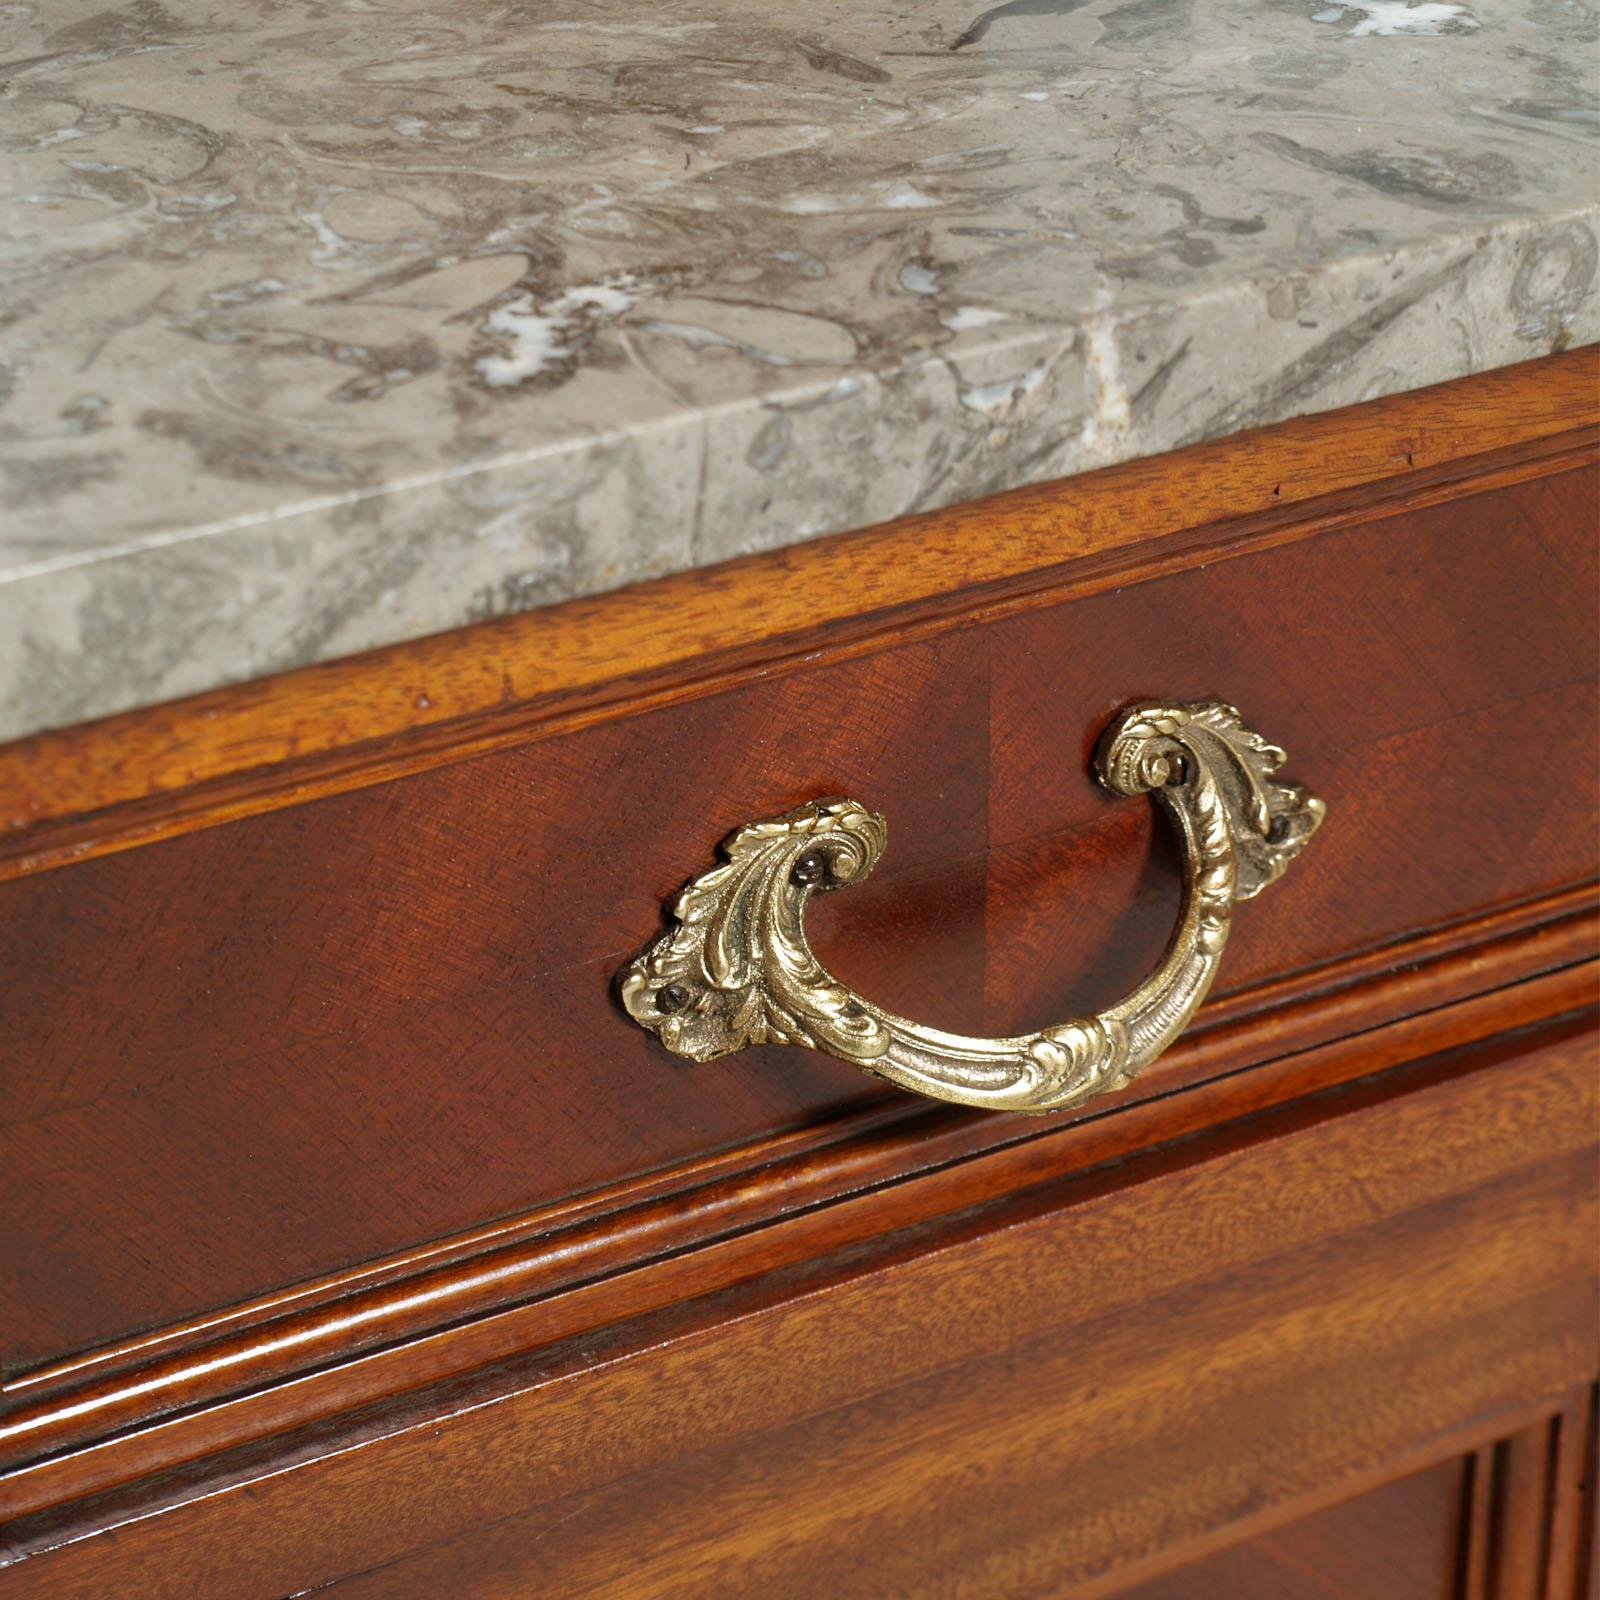 Italian Italy 1910s Art Nouveau Nightstand in Mahogany, Marble Top Restored Wax Polished